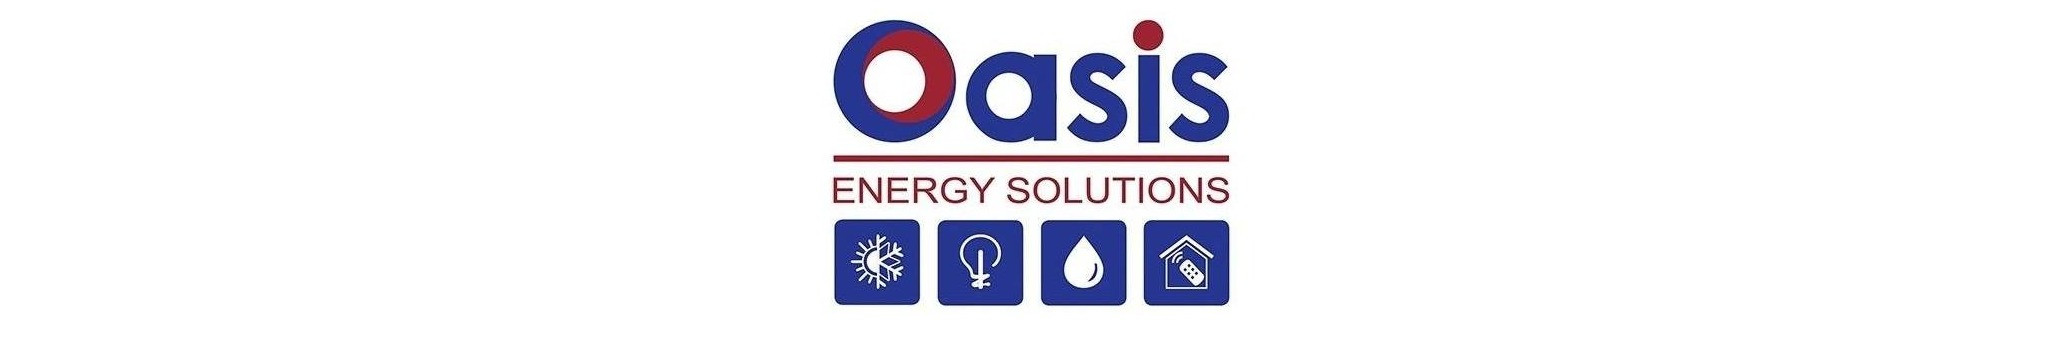 Air conditioning, heating, electrics, home automation, pools